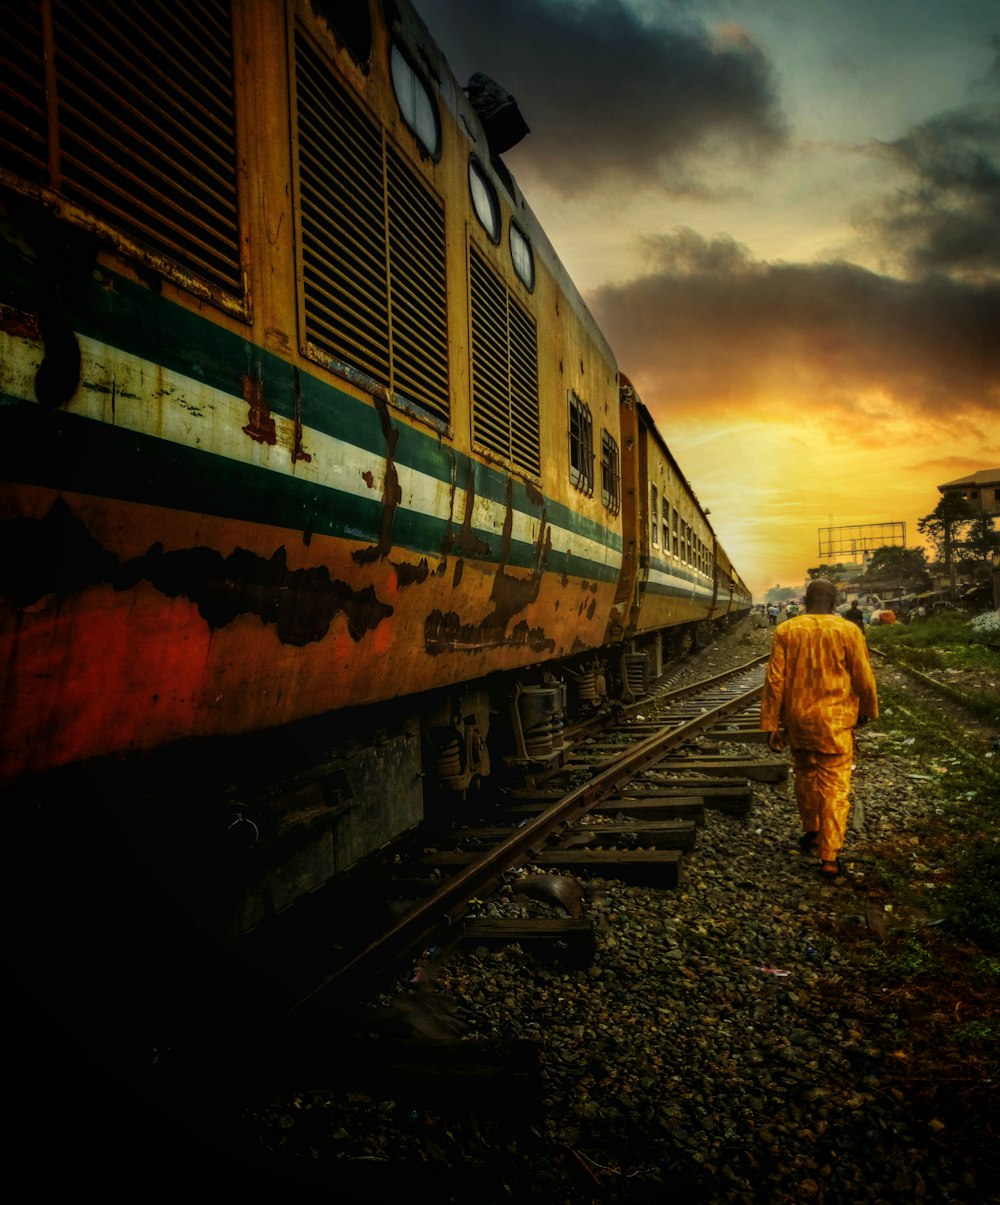 a person in a yellow outfit walking on train tracks